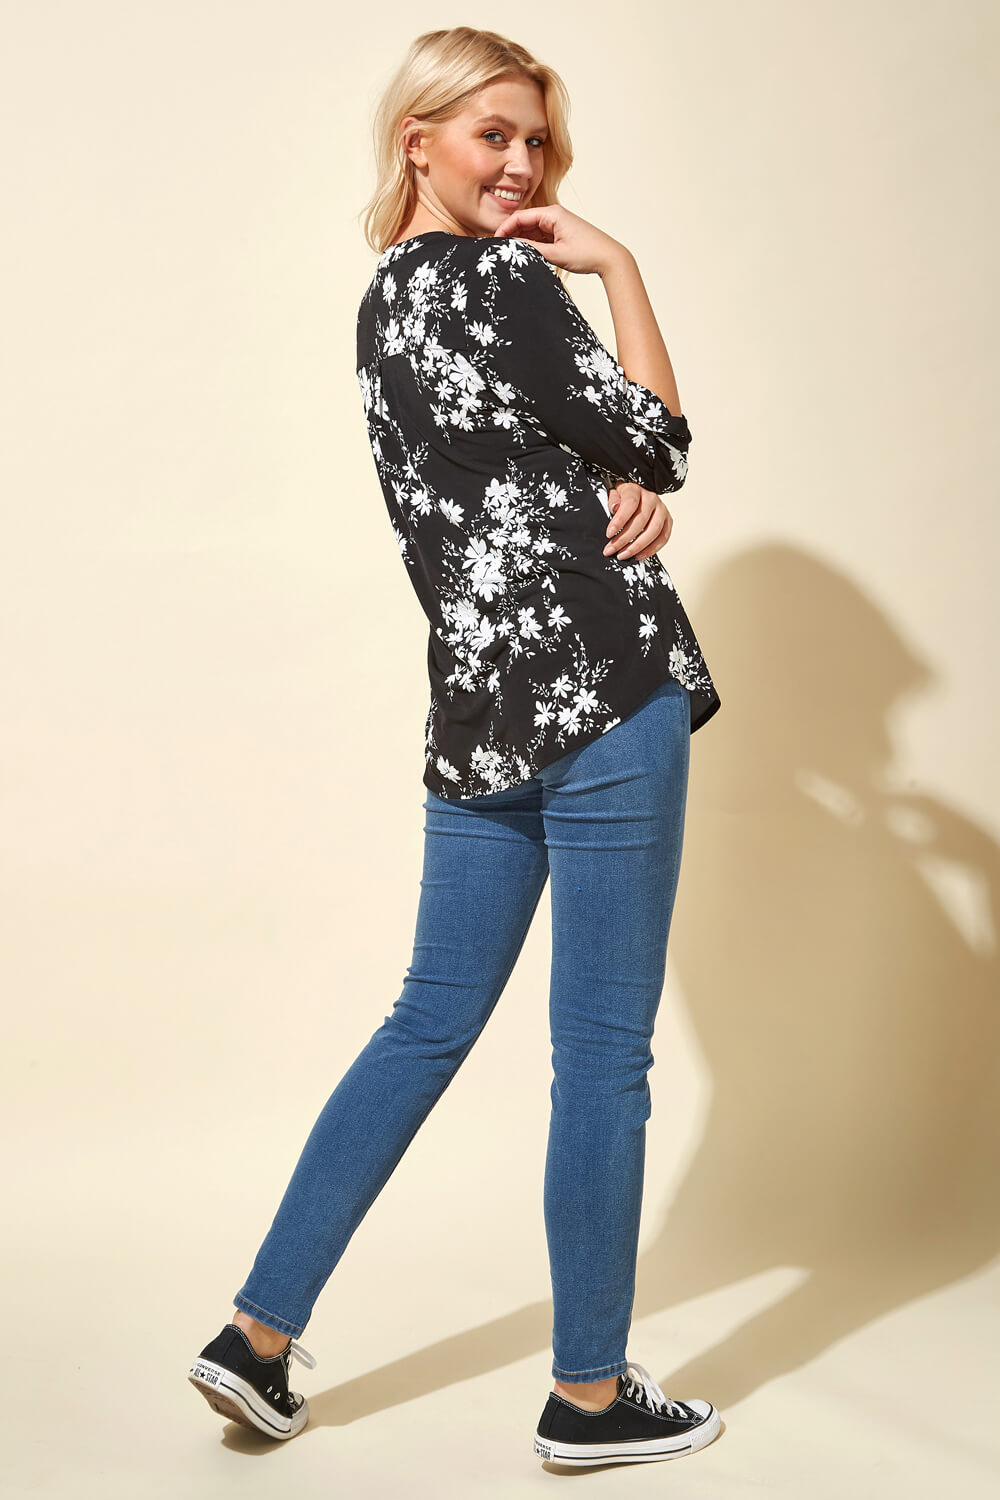 Black Floral Puff Print 3/4 Sleeve Blouse, Image 2 of 4